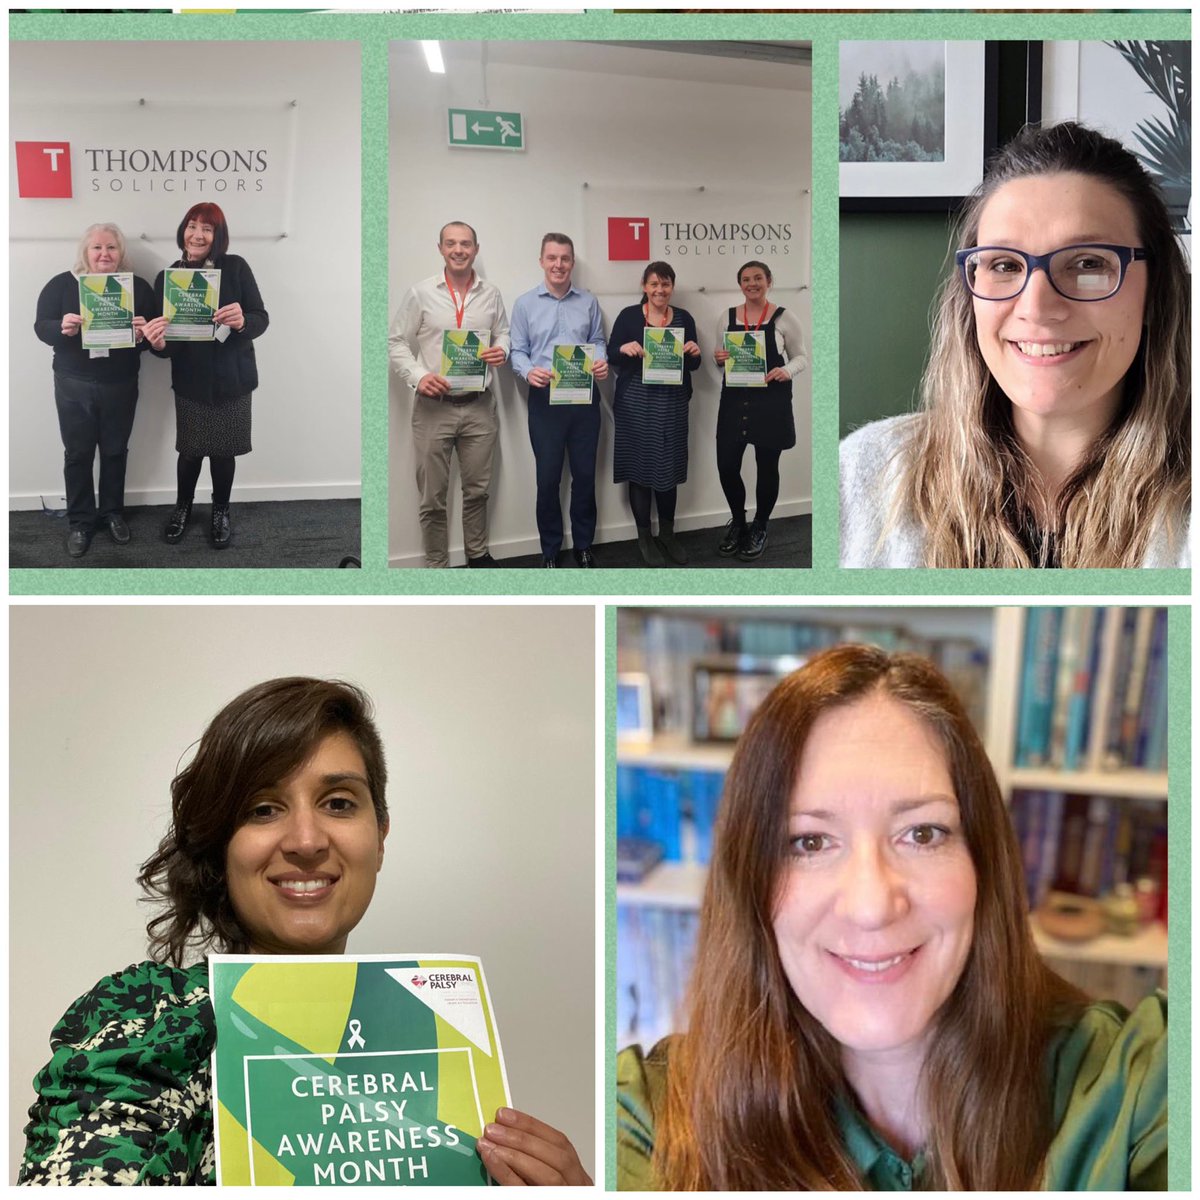 Tomorrow, 1st March, marks the beginning of #CerebralPalsyAwarenessMonth here at @ThompsonsLaw Wales and South West we are joining in already with #GoGreen4CP to raise awareness.